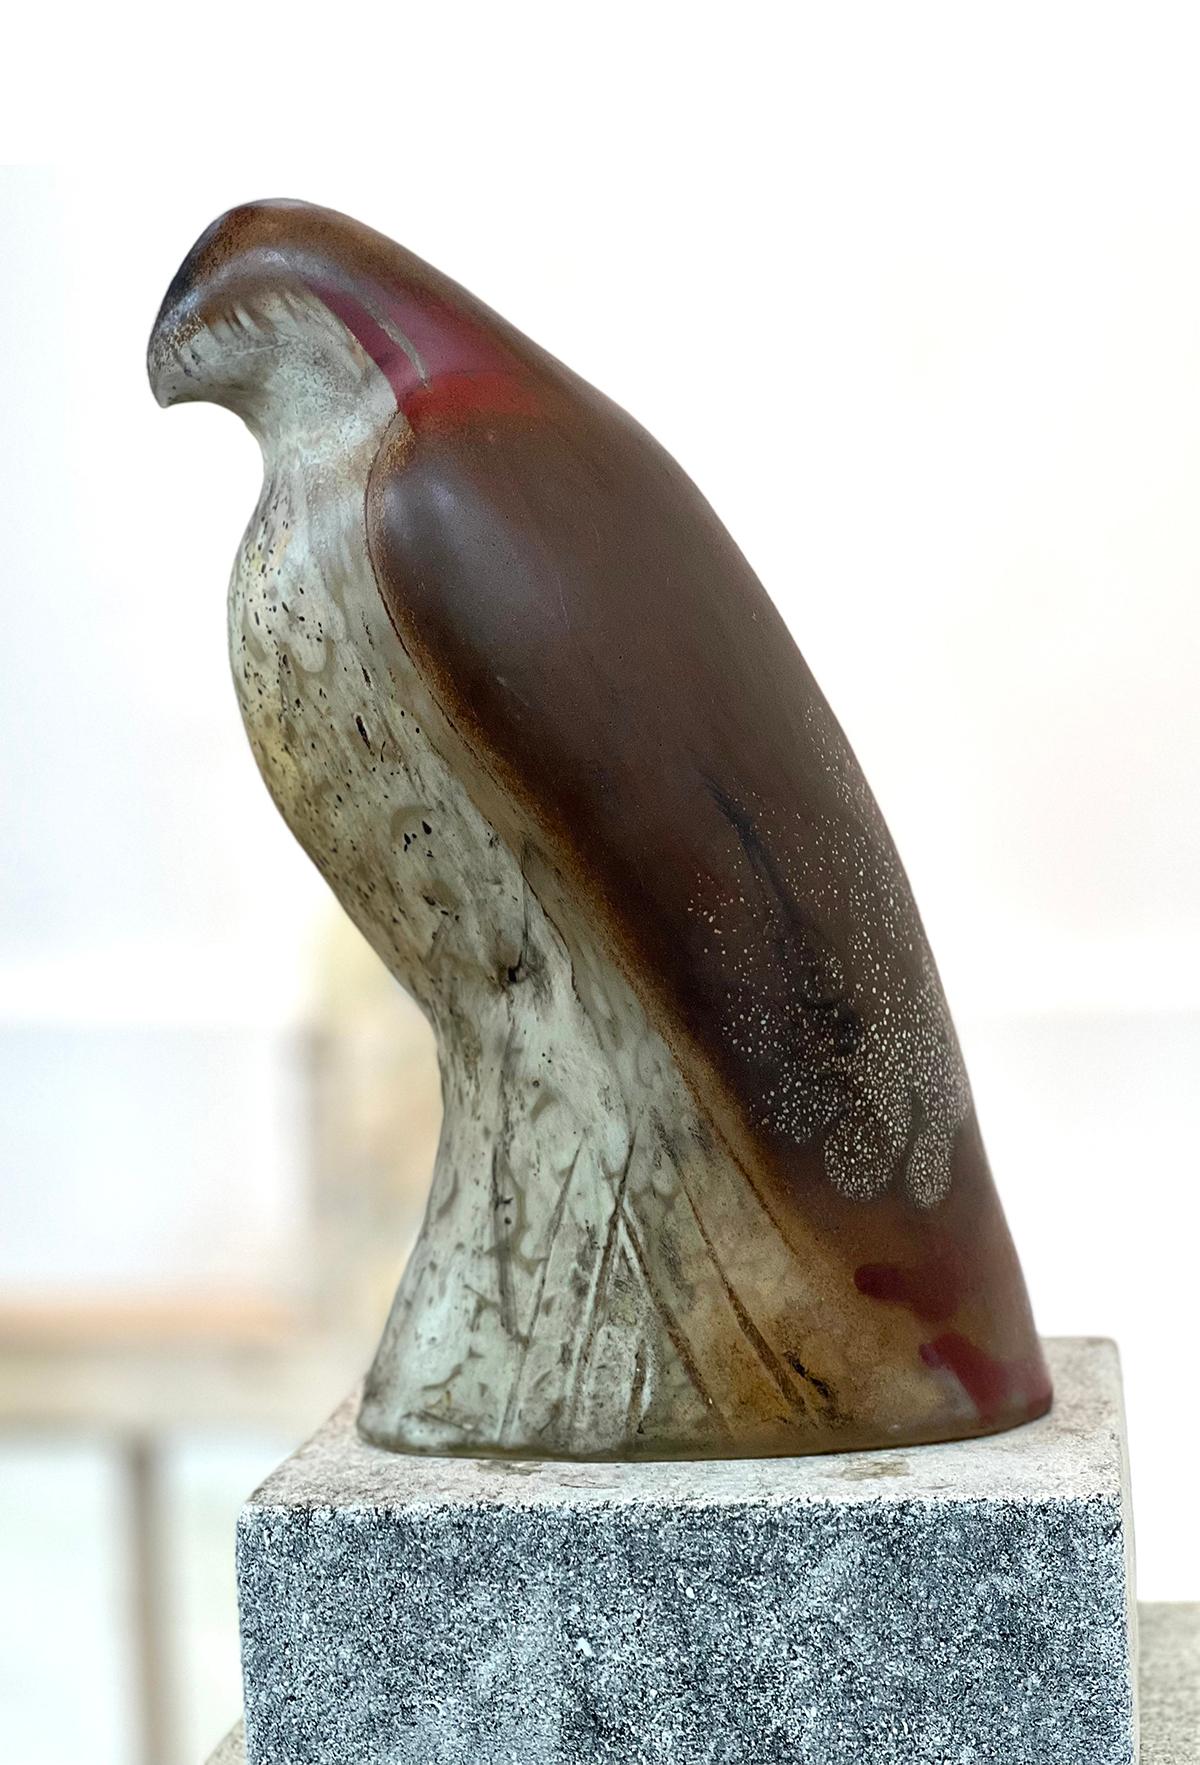 Hand blown pigmented glass and hand carved limestone from the renowned studio of Jane Rosen. 

Bird:  13 x 7 x 5"
Top Grey Limestone Base: 4 x 7 x 9"
Bottom Base:  48 x 8 x 11"
Total Dimension:  65 x 8 x 11"

Approximately 200 lbs. (not including